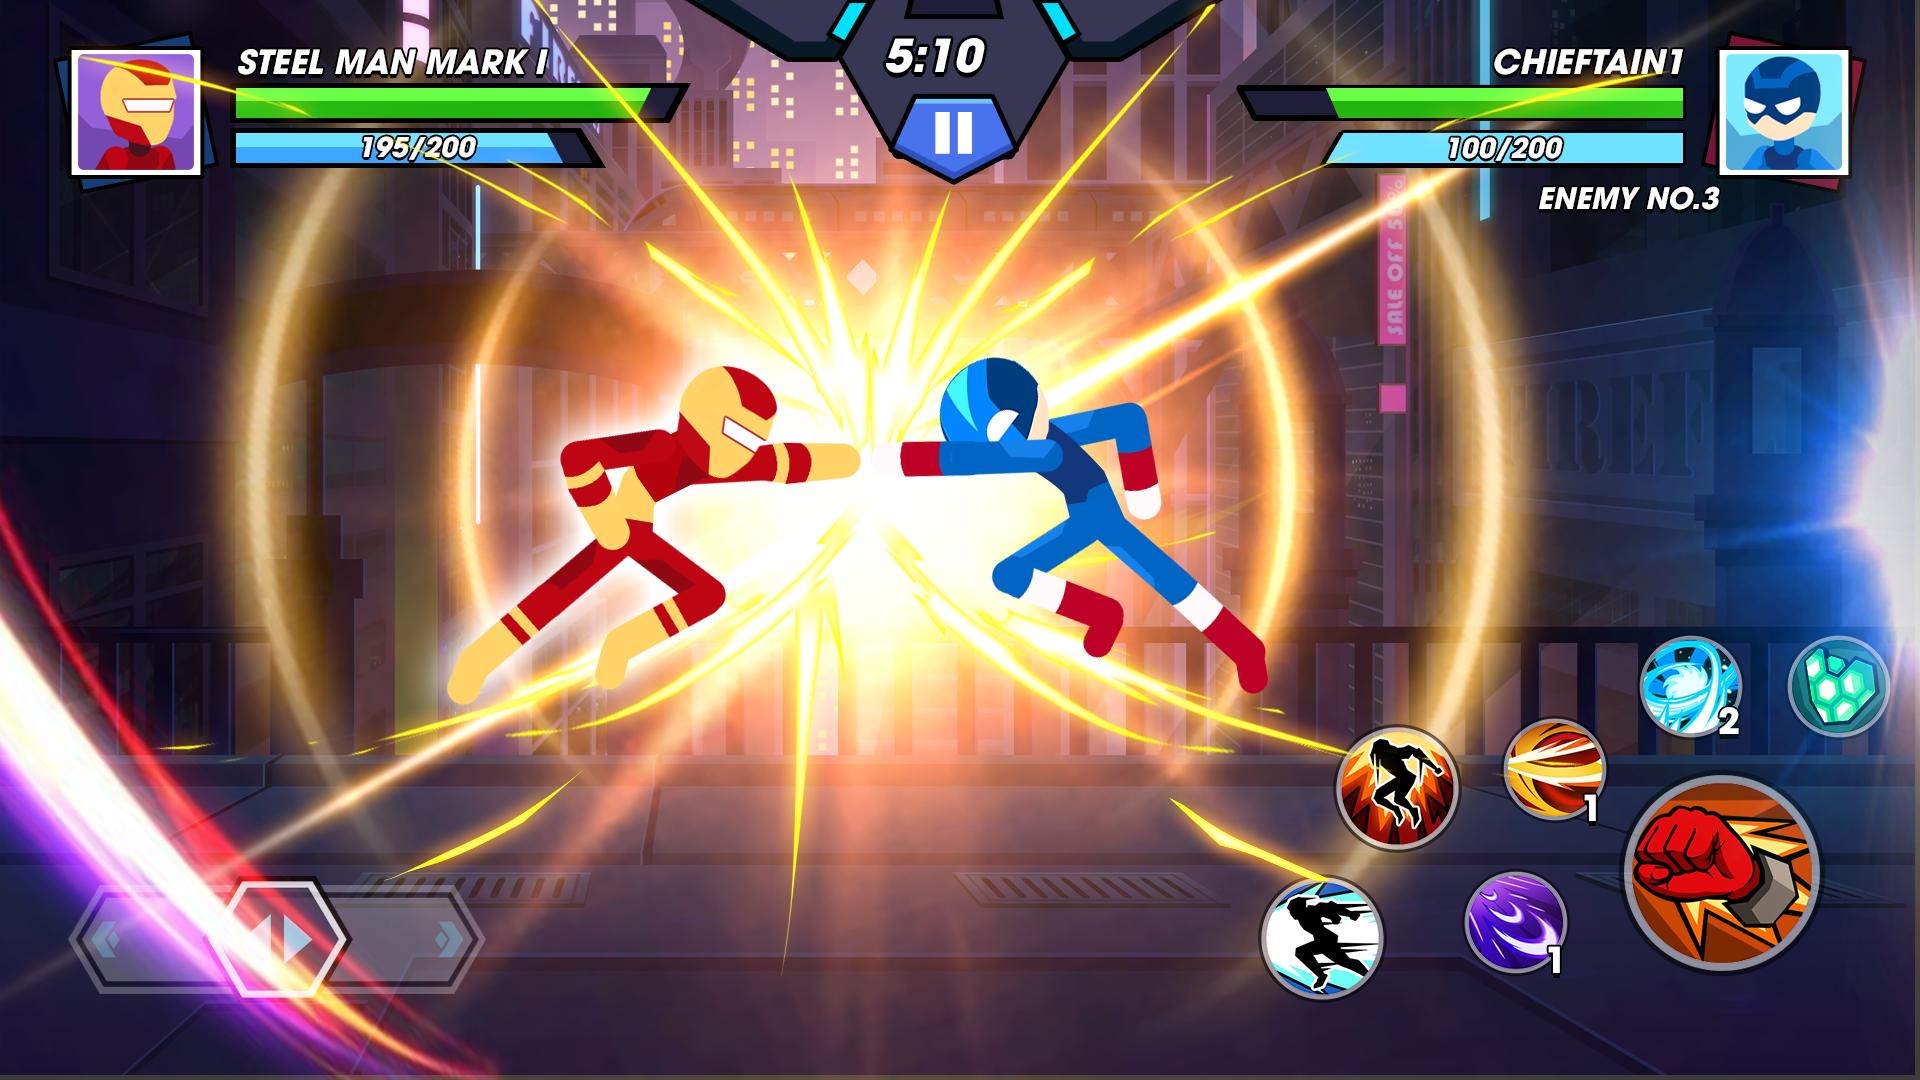 Stickman Fighter Infinity for Android - APK Download